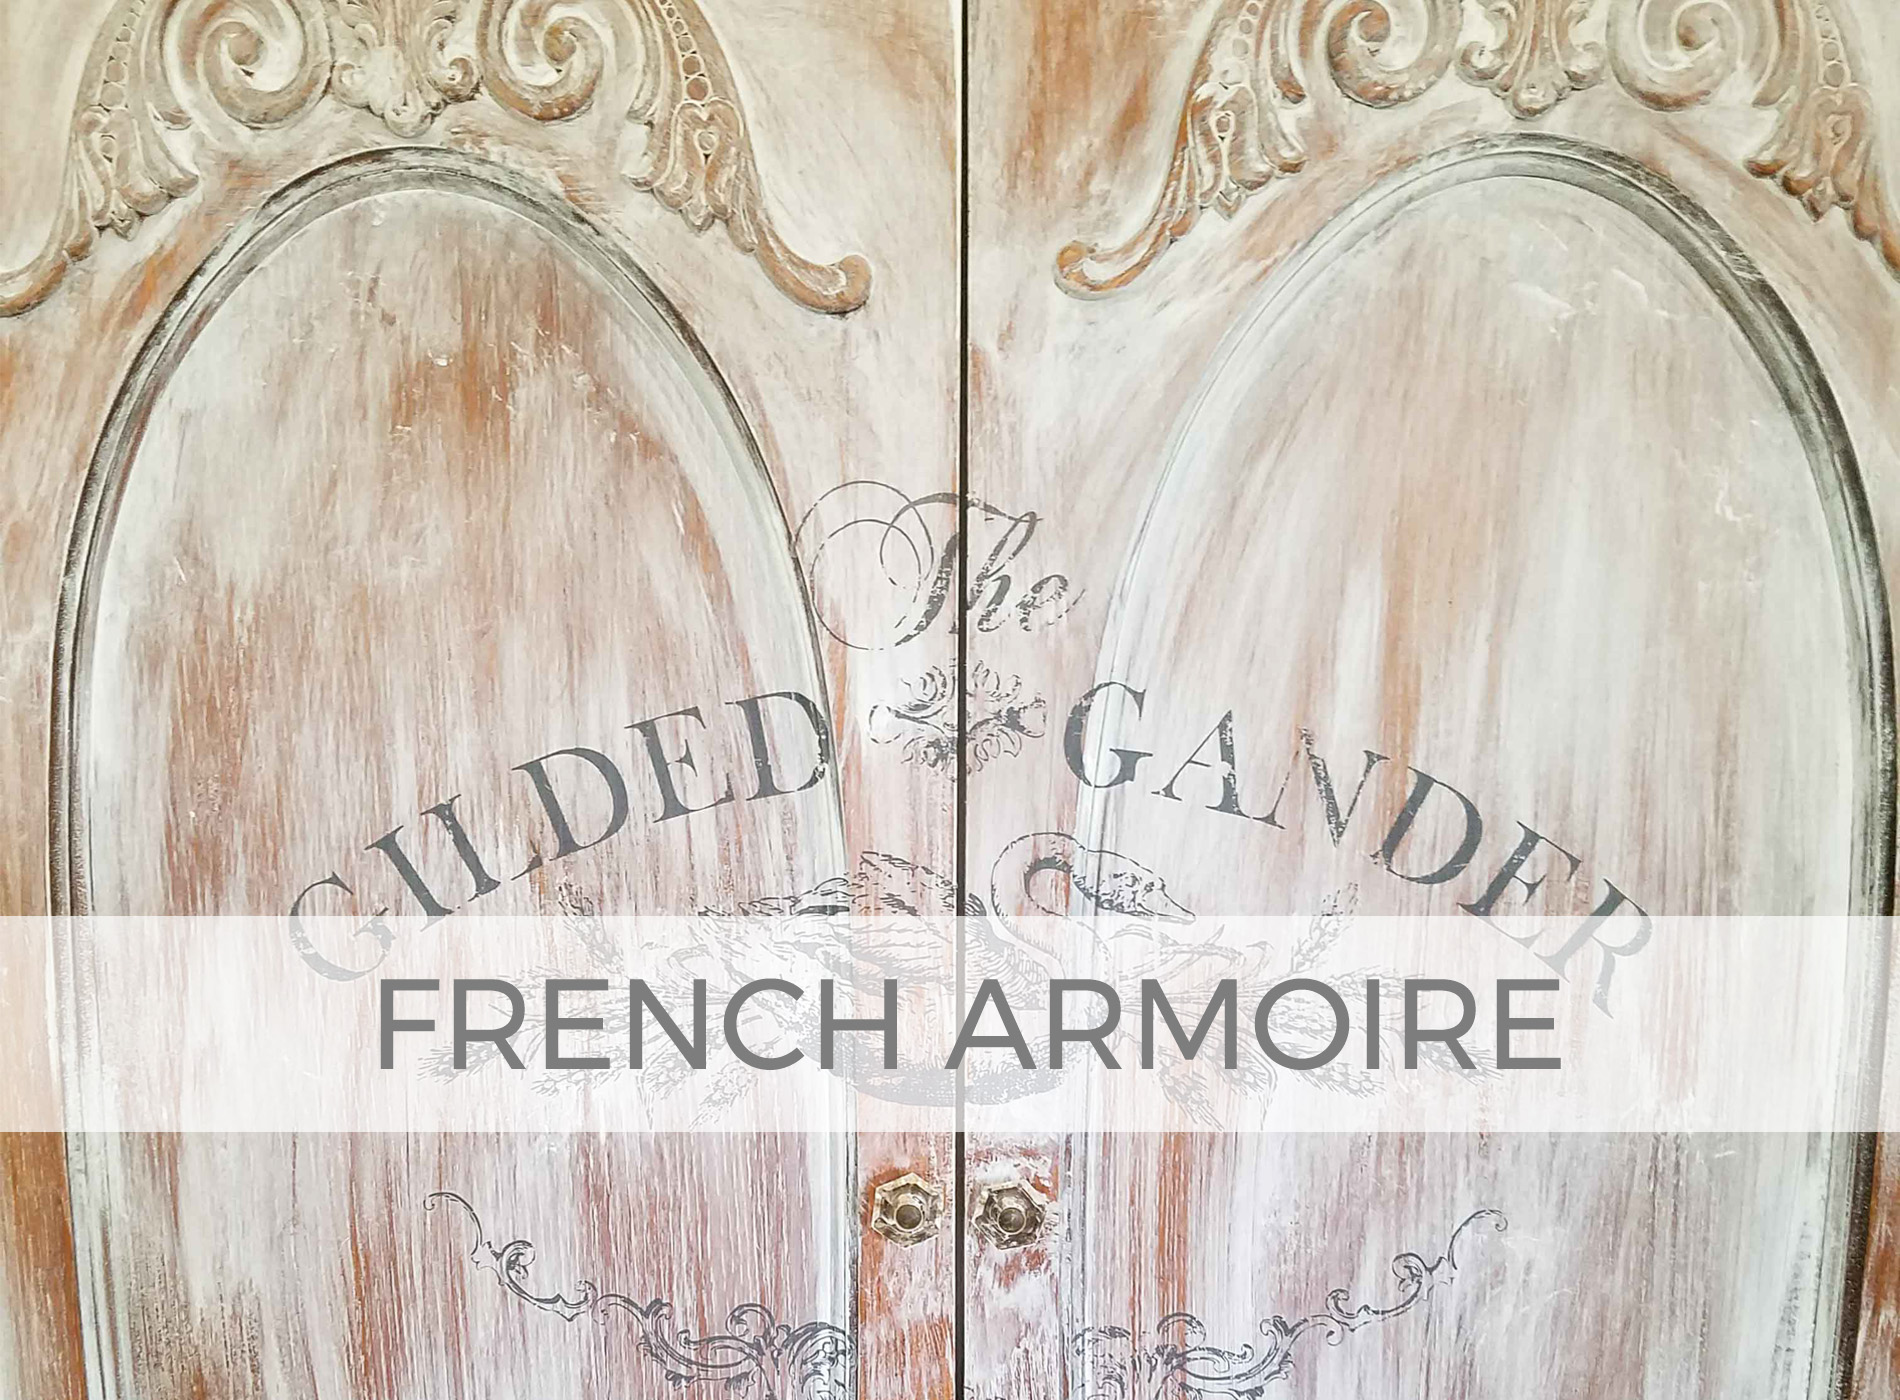 Entertainment Center by French Armoire by Larissa of Prodigal Pieces | prodigalpieces.com